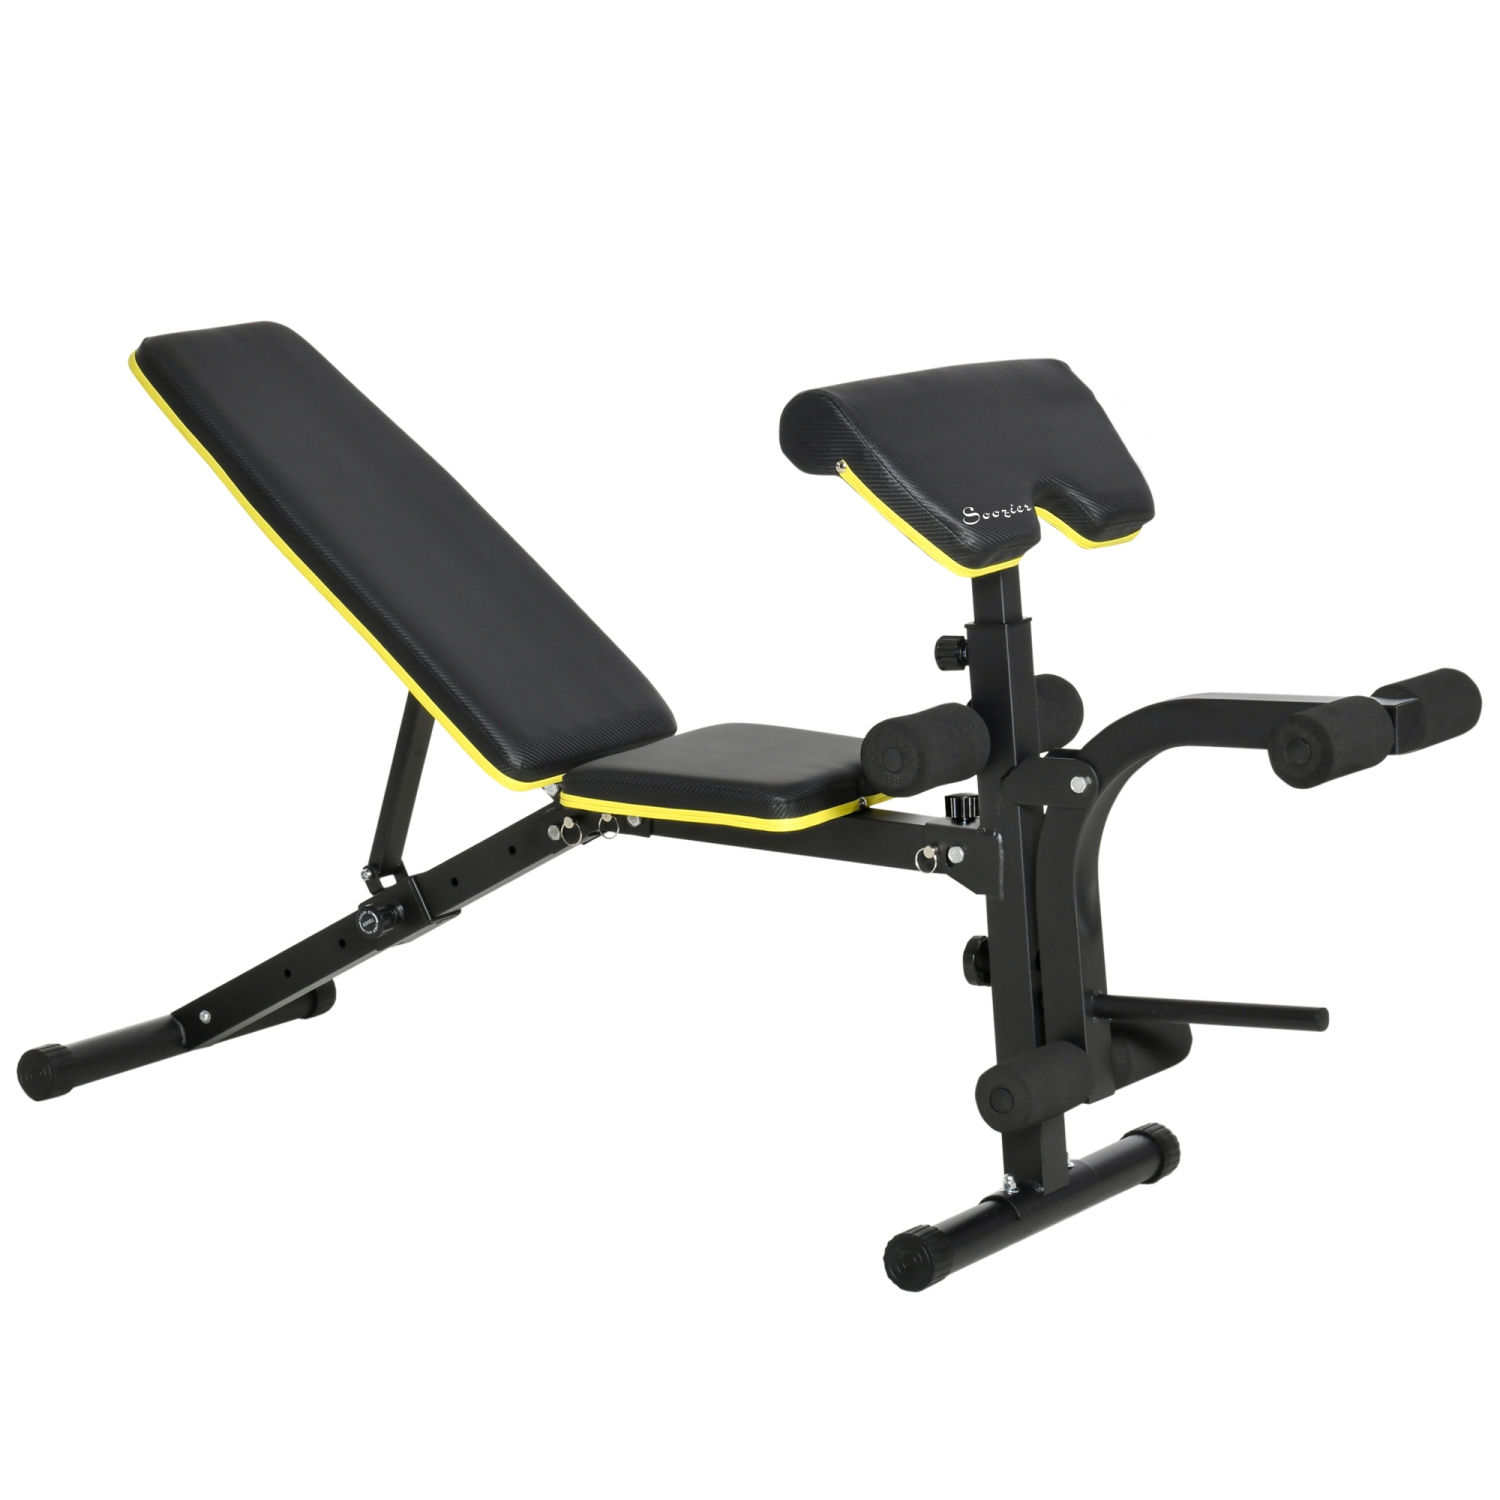 Soozier Adjustable Weight Bench, Sit Up Dumbbell Bench, Multi-Functional Purpose Hyper Extension Workout Bench with Adjustable Seat and Back Angle